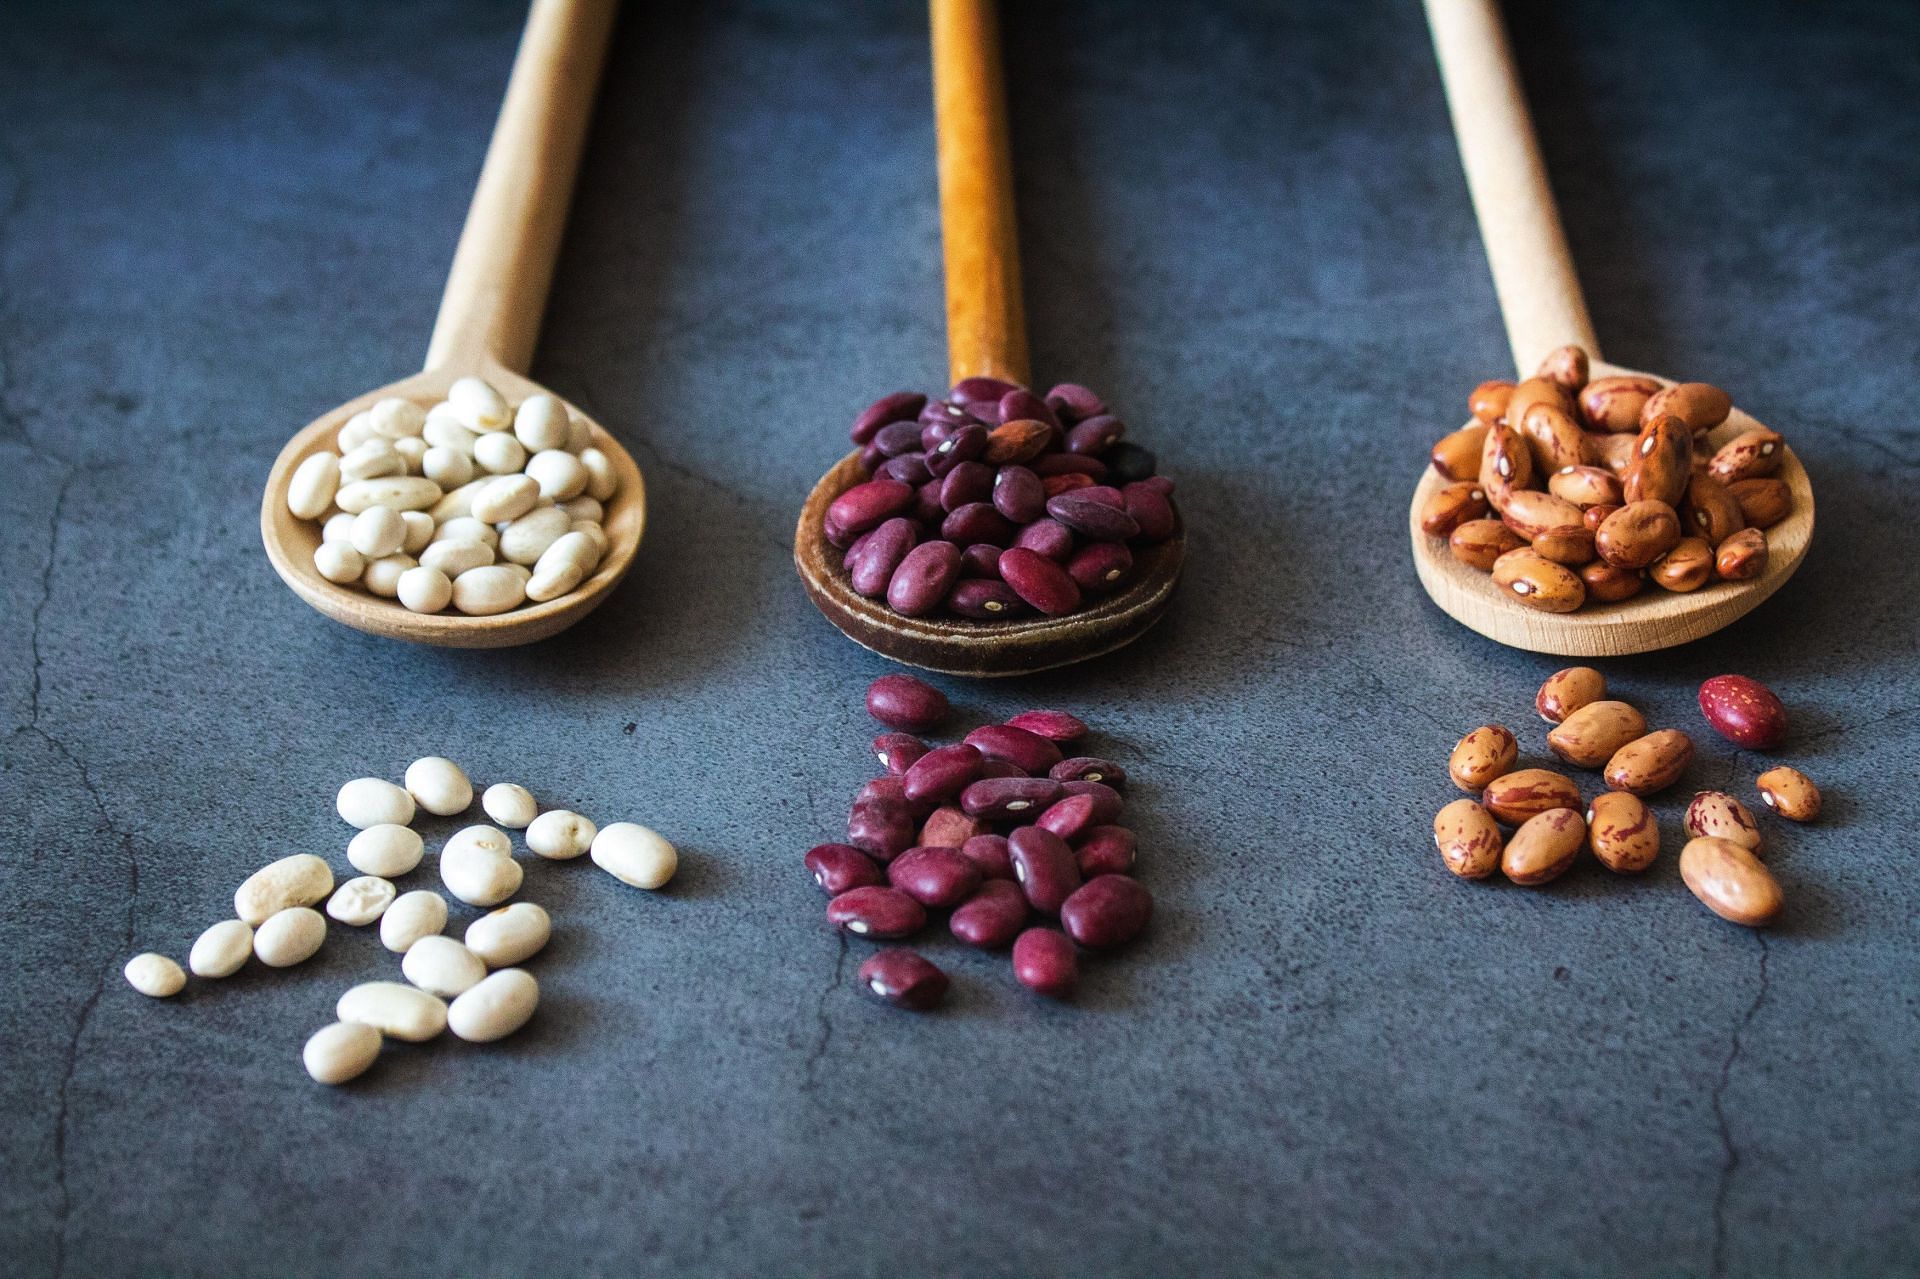 Pulses and legumes can be considered as a good source of protein. (Image via Unsplash/Tijana Drndarski)